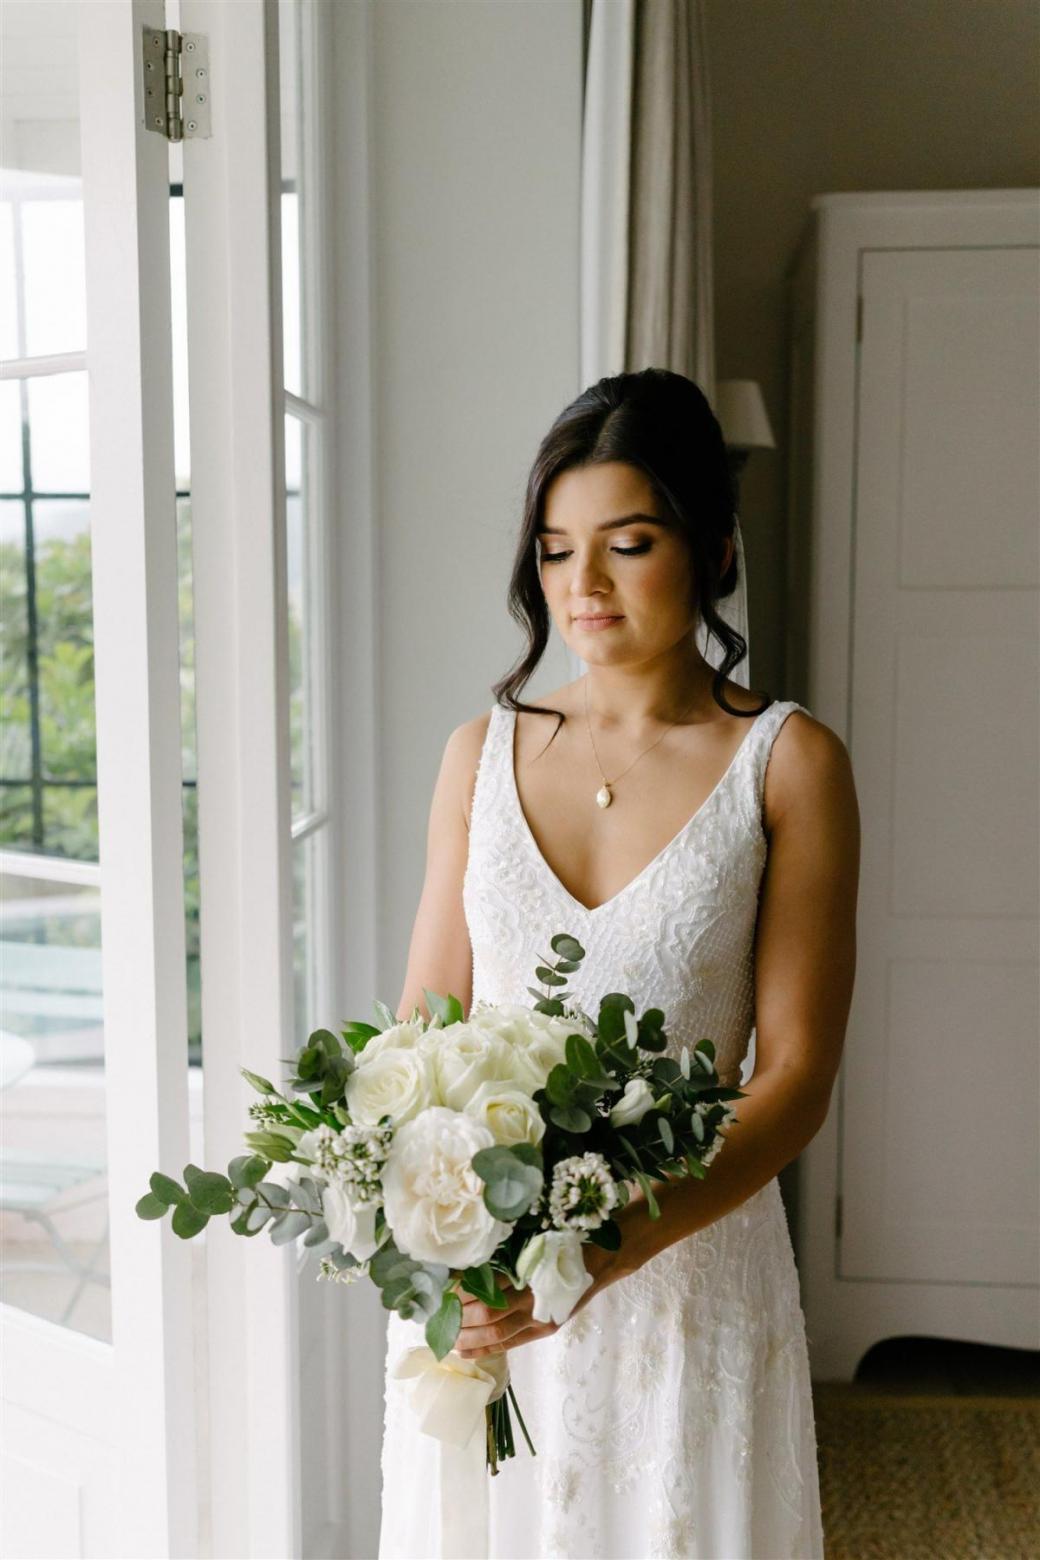 Real bride Jess wore the Luxe Beatrice wedding dress by Karen Willis Holmes.